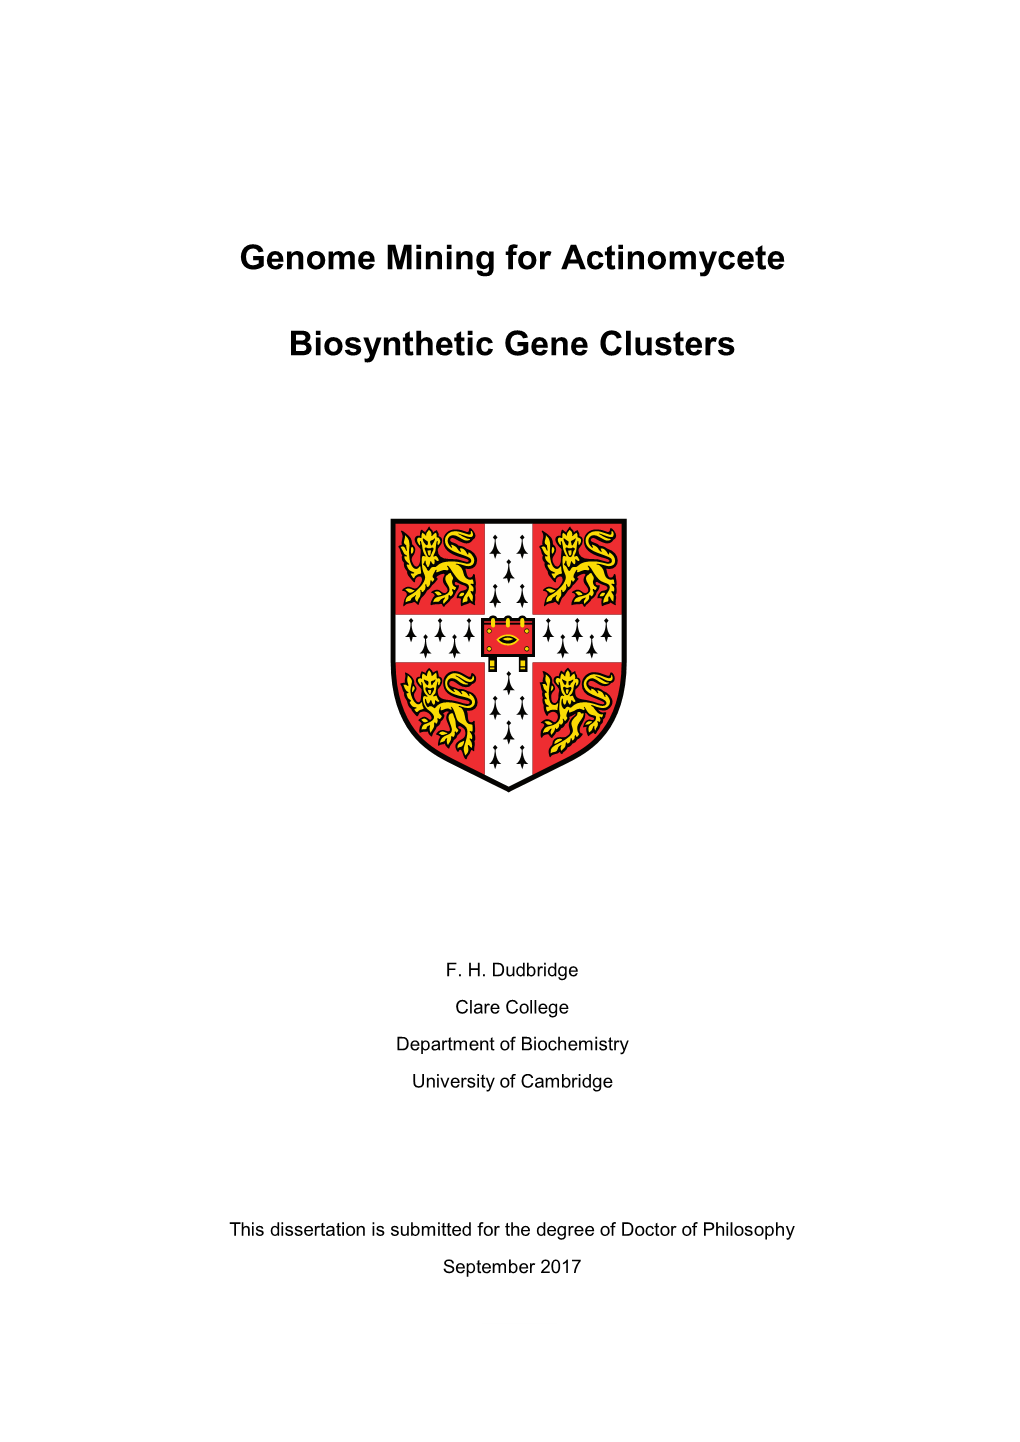 Genome Mining for Actinomycete Biosynthetic Gene Clusters